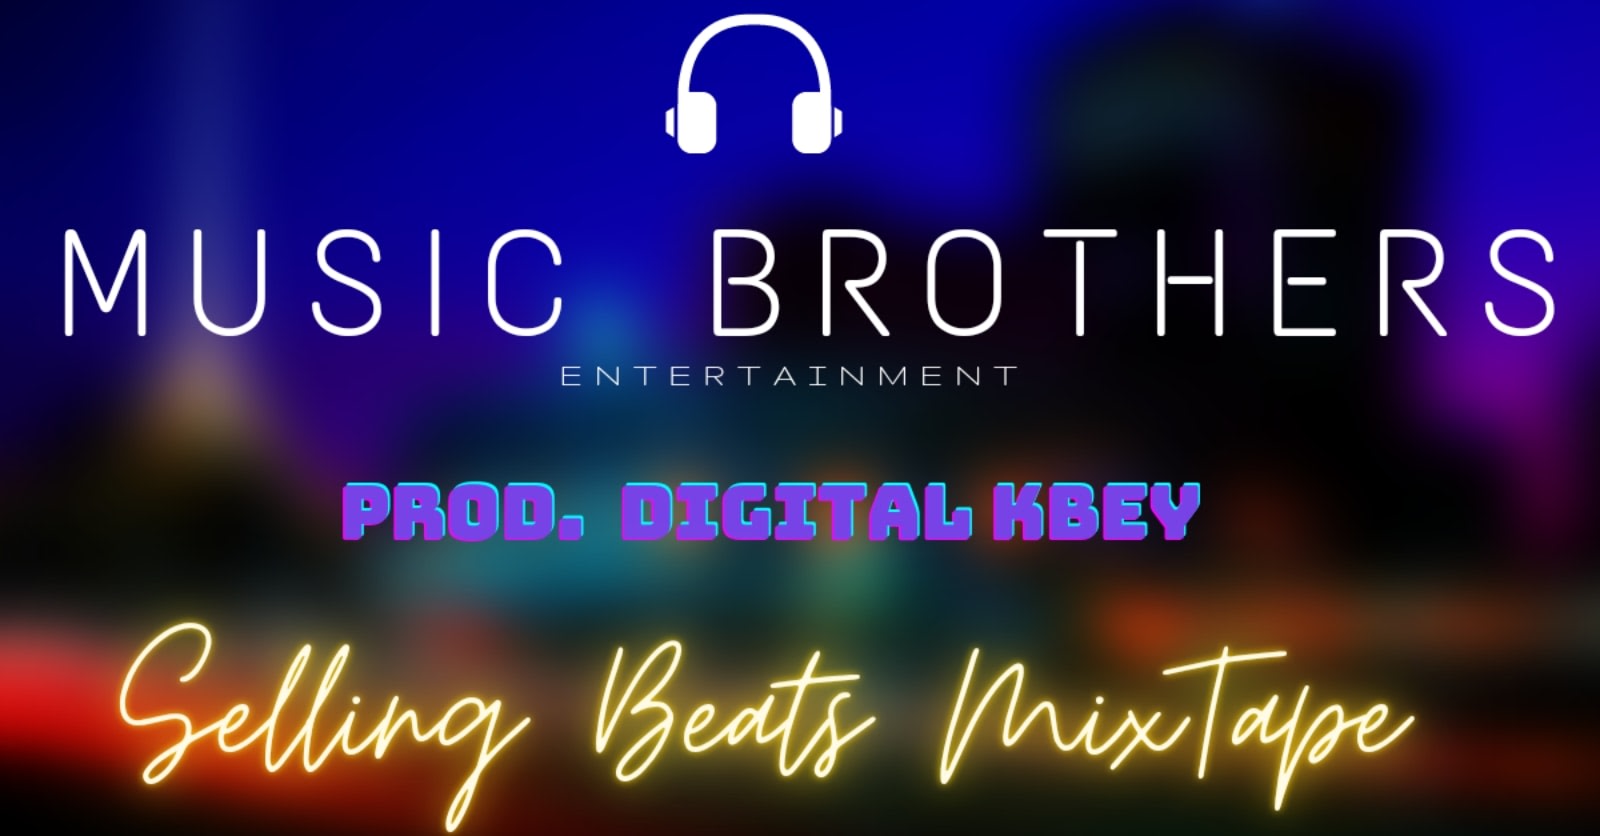 Music Brothers Entertainment MBE